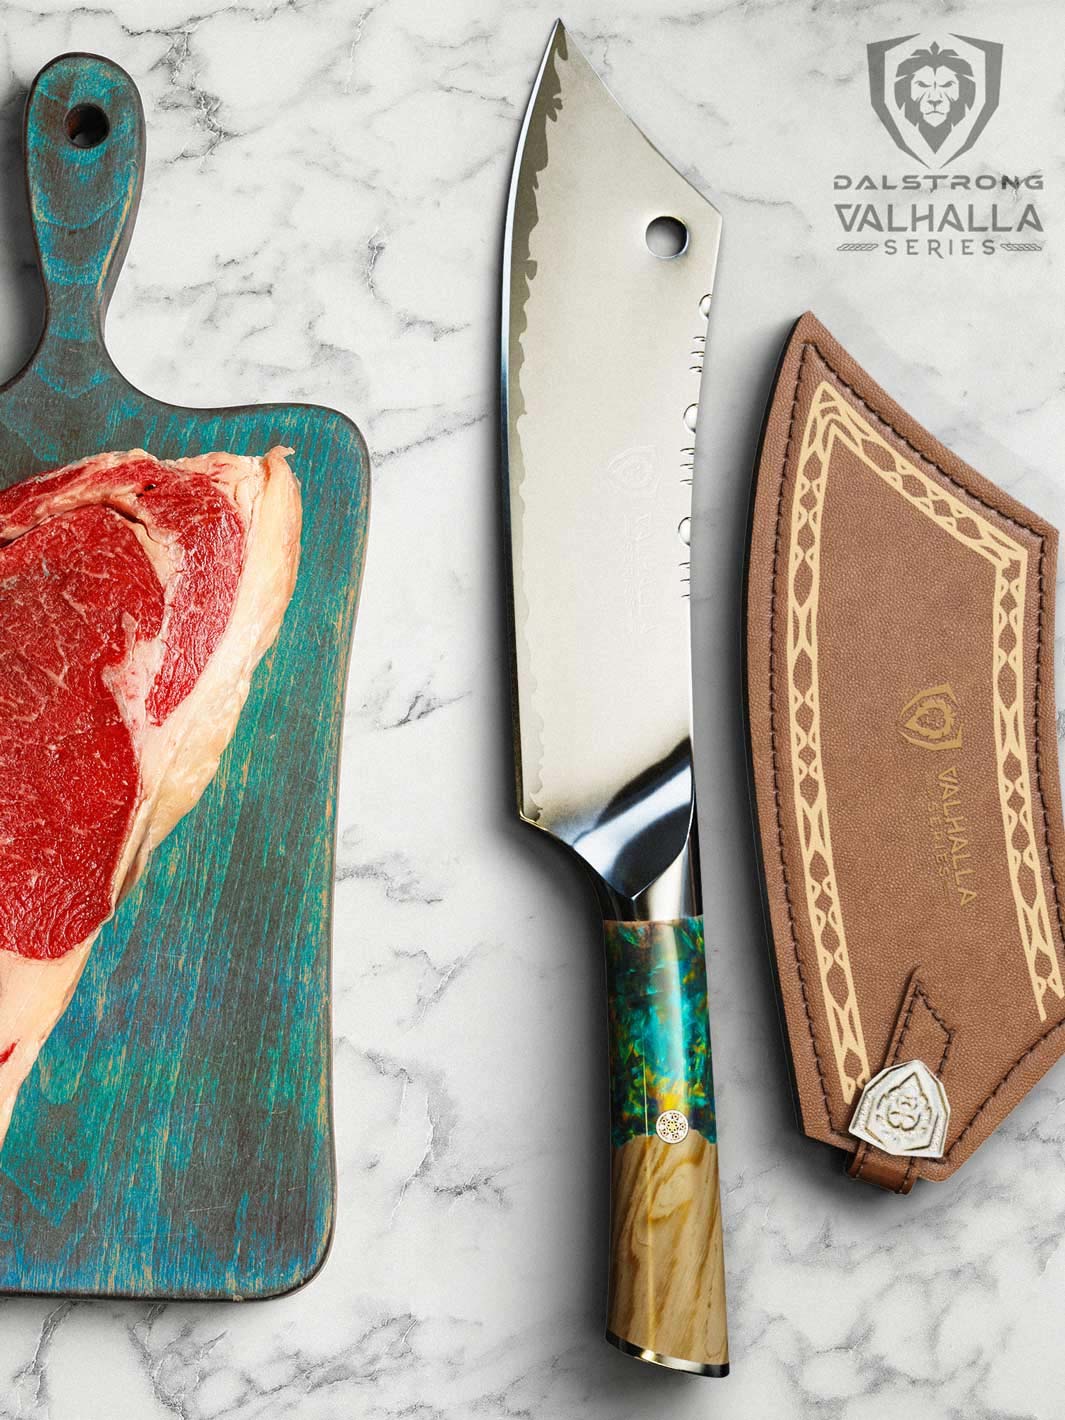 Dalstrong valhalla series 8 inch crixus knife with wooden handle and sheath beside a steak on a cutting board.